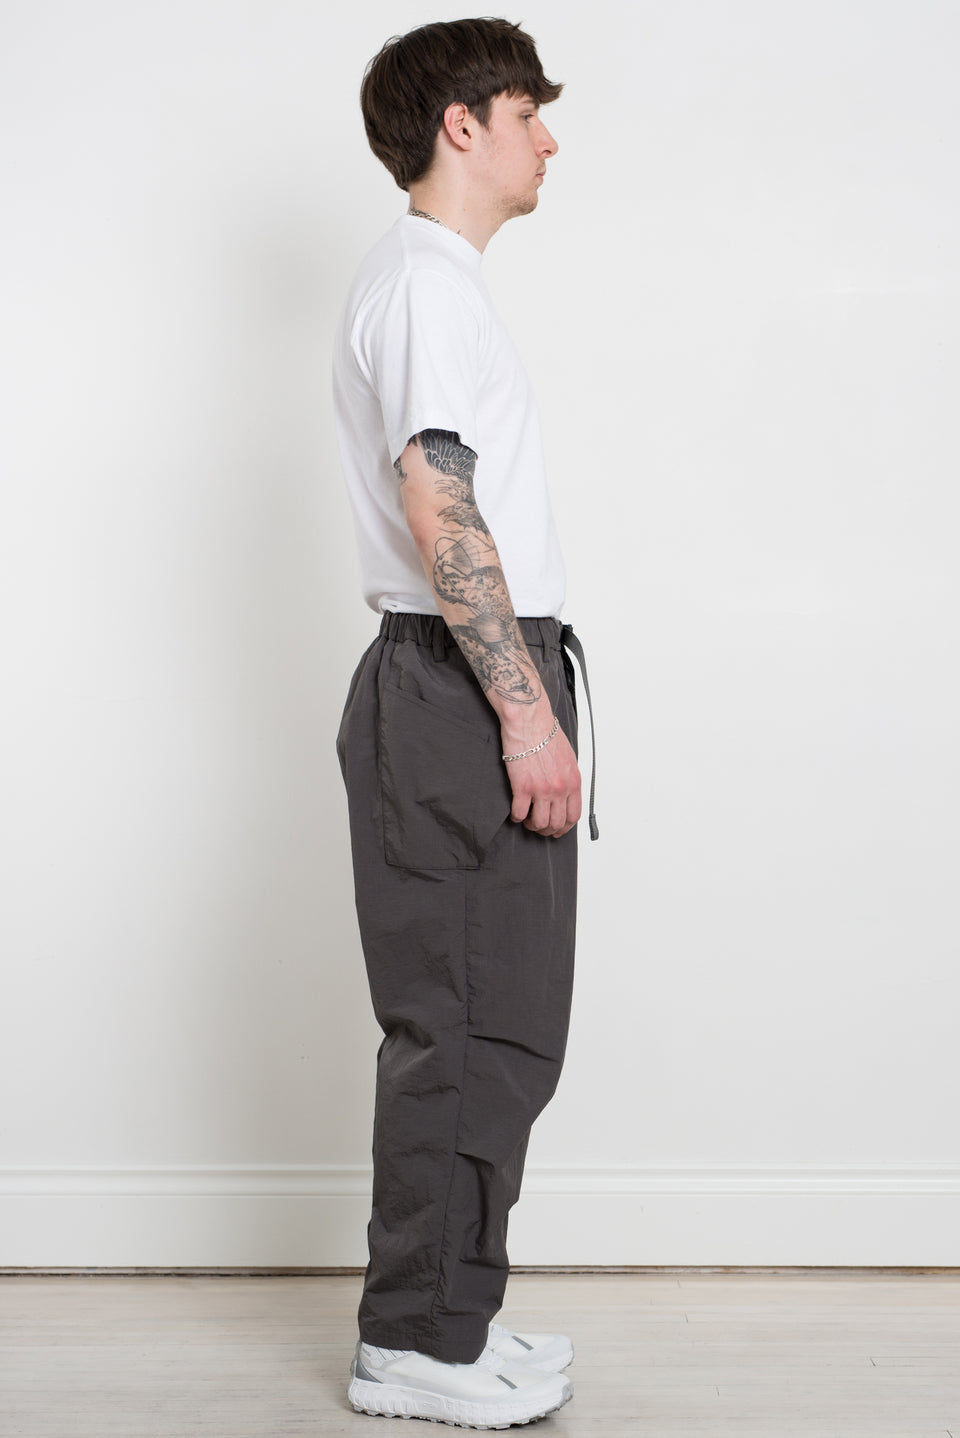 CMF Outdoor Garment 23SS SS23 Comfy Outdoor Garment m65 Pants Charcoal Calculus Victoria BC Canada